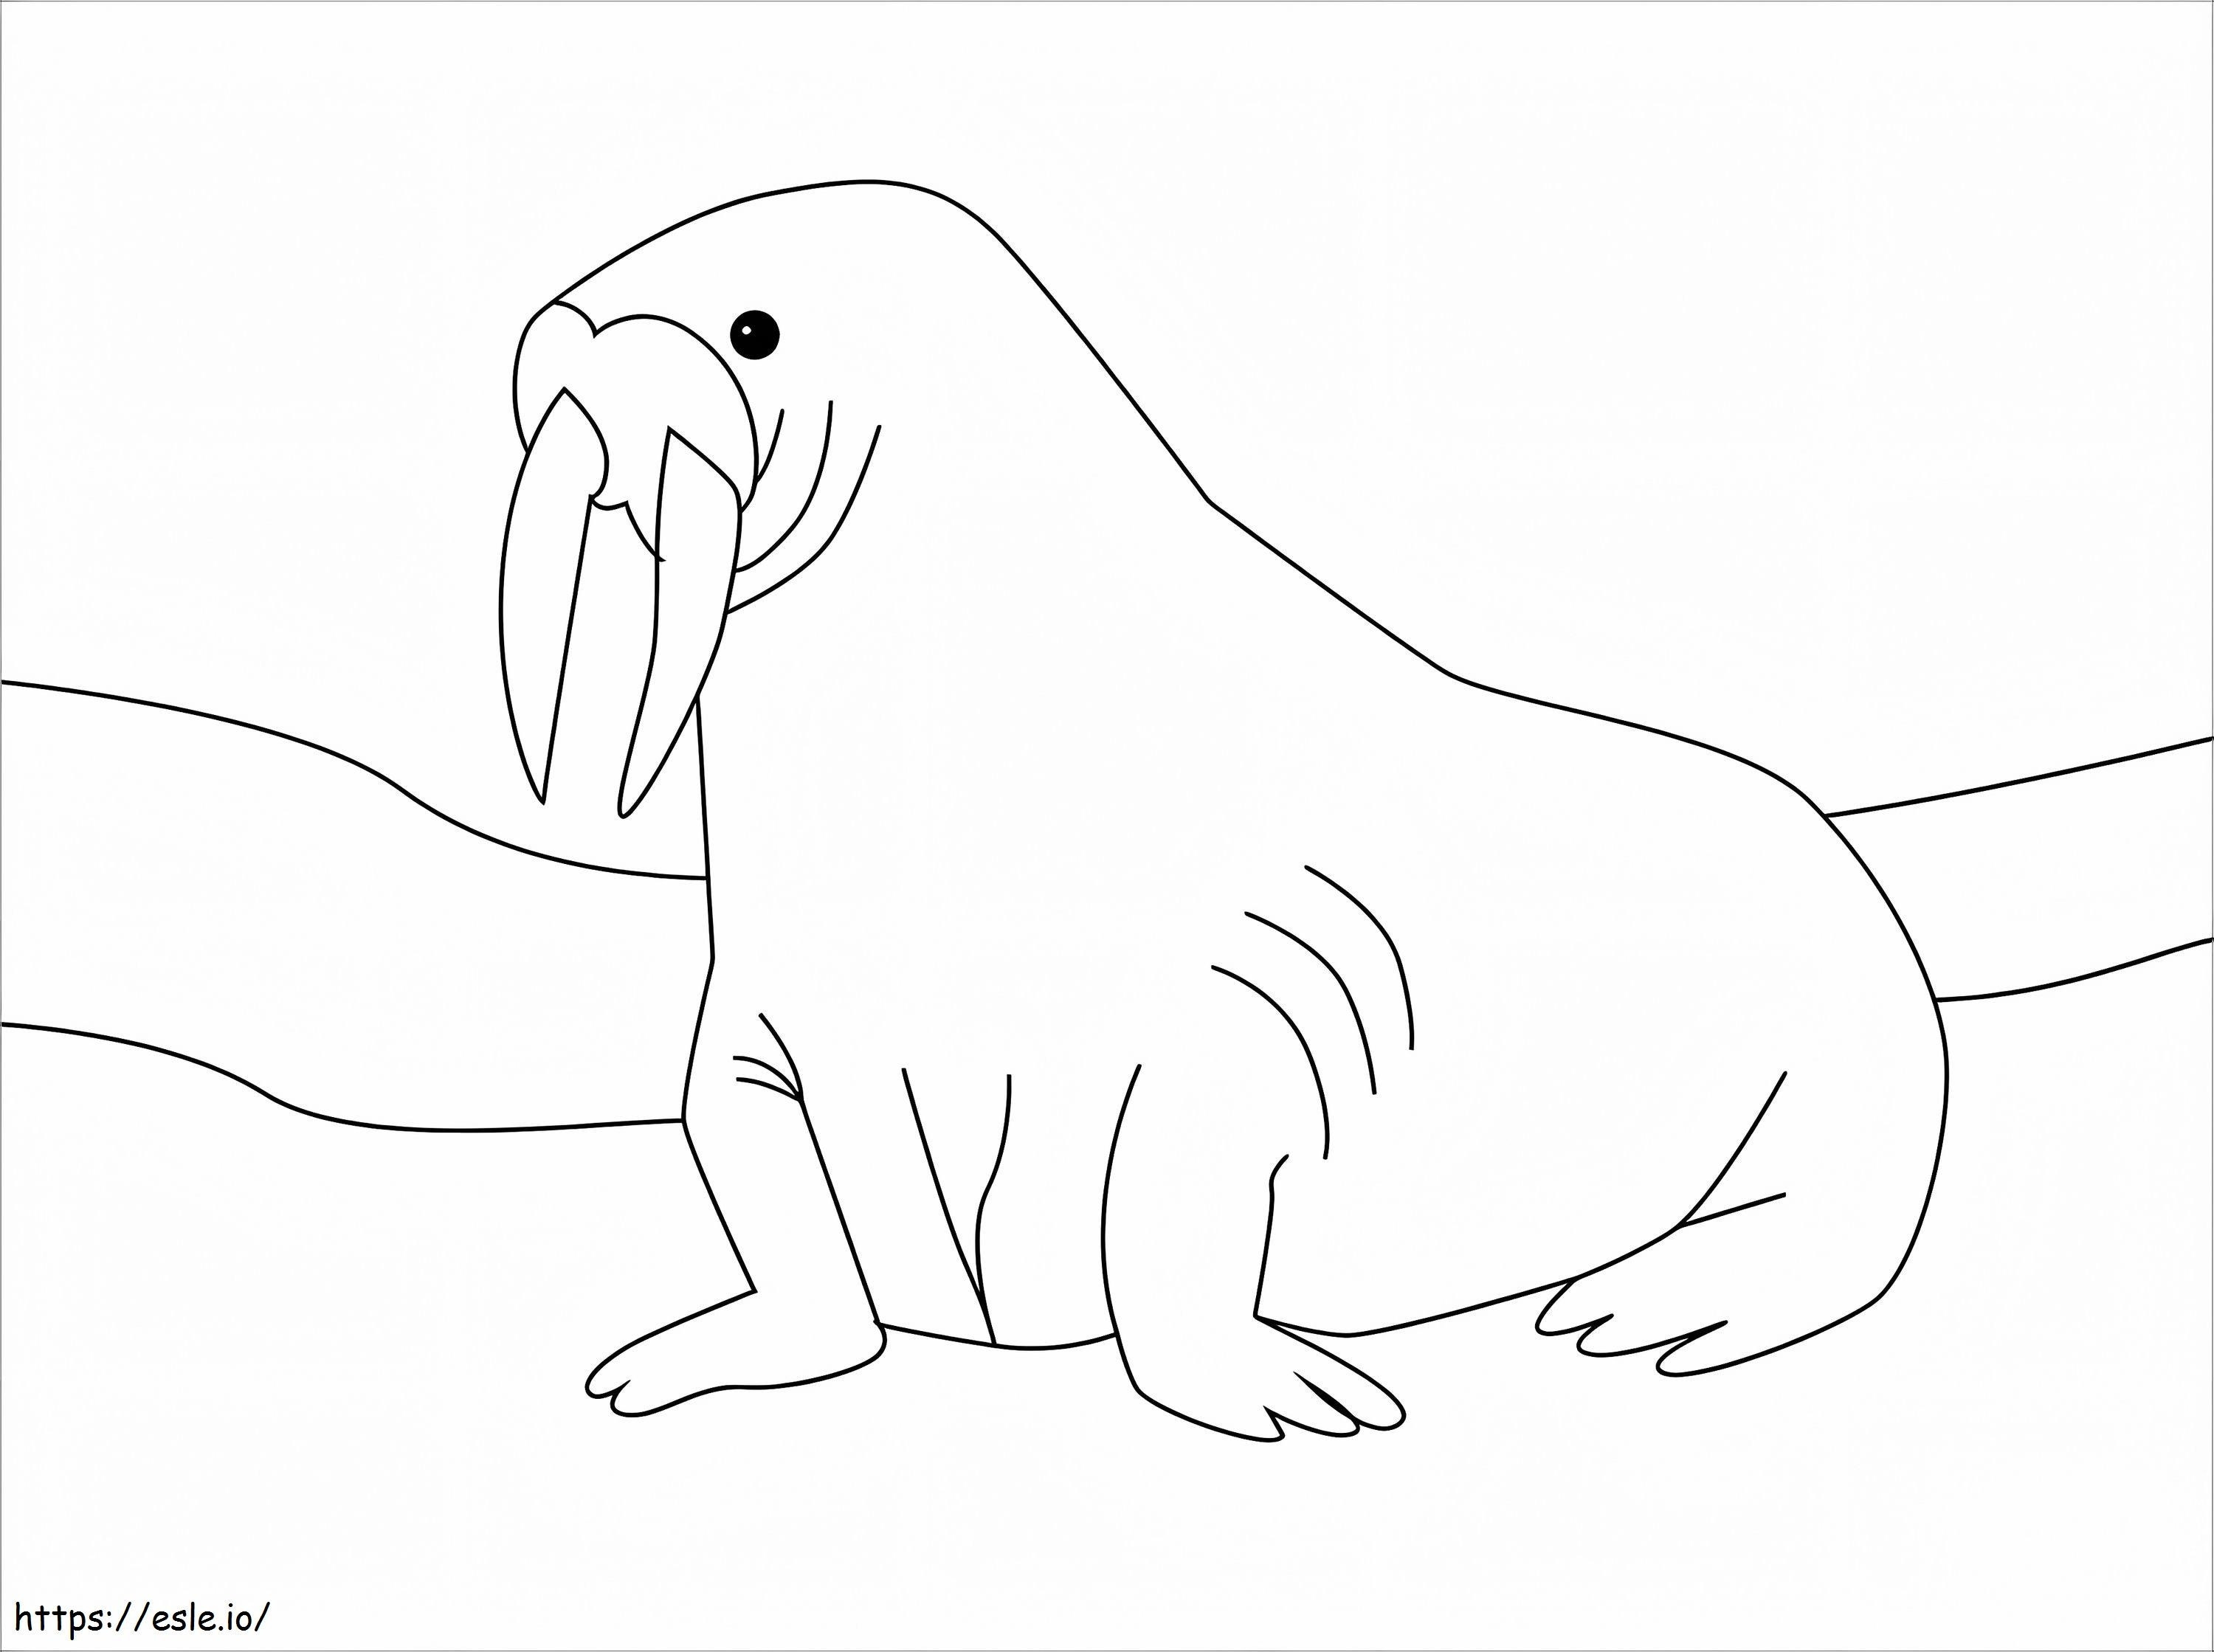 Simple Walrus coloring page